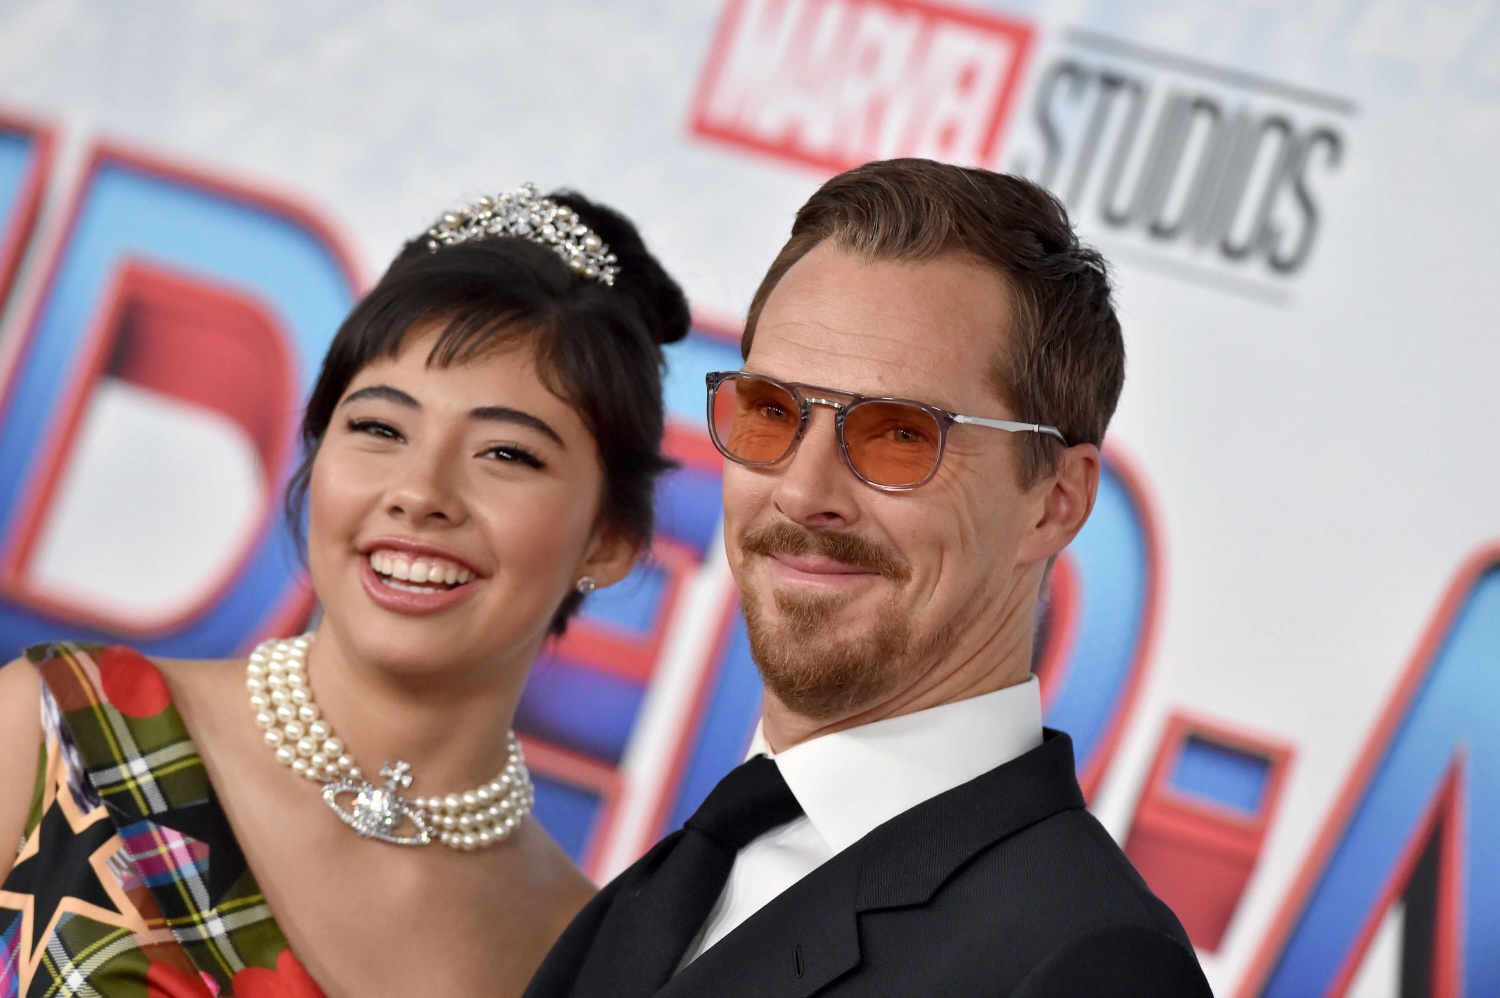 Xochitl Gomez and Benedict Cumberbatch attend Sony Pictures' "Spider-Man: No Way Home" Los Angeles Premiere on December 13, 2021 in Los Angeles, California. (Photo by Axelle/Bauer-Griffin/FilmMagic)